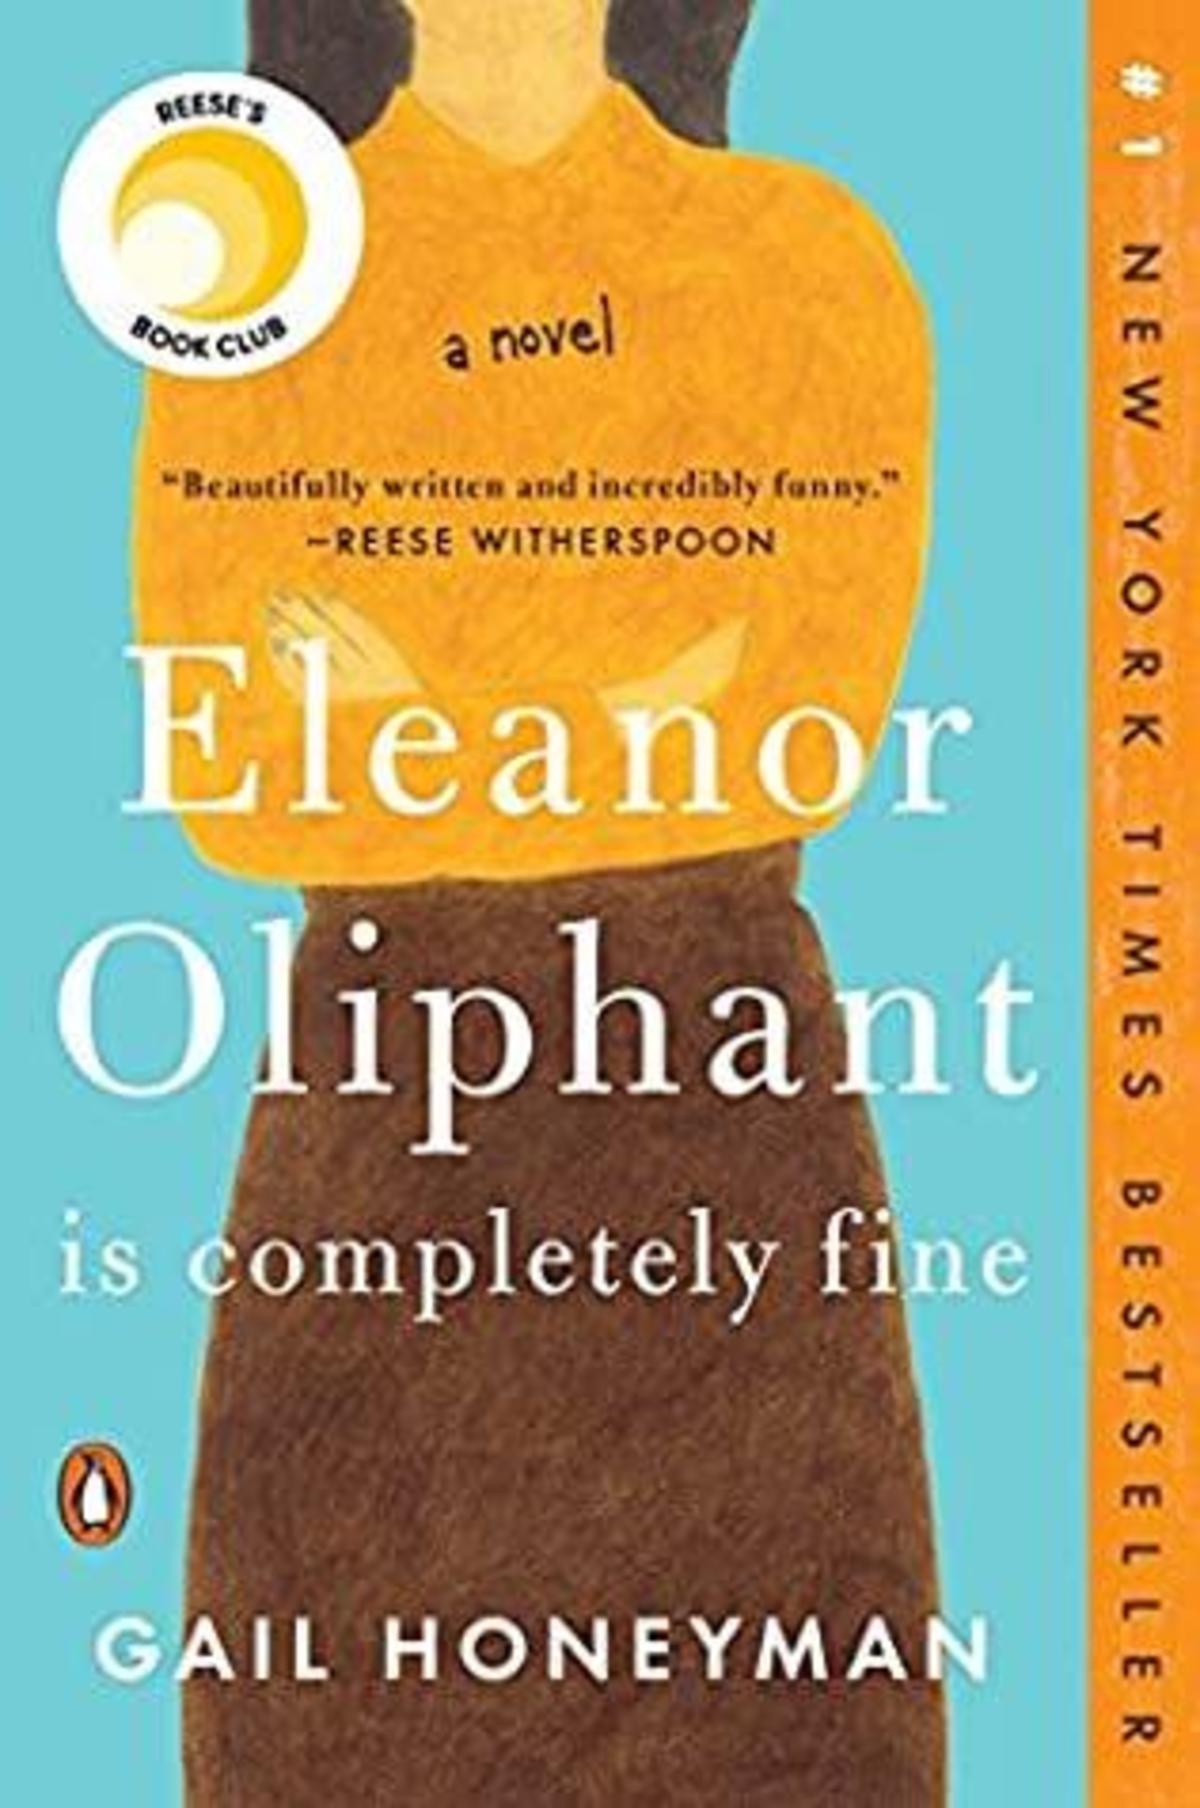 The life of an outsider is vividly captured in Eleanor Oliphant is Completely Fine by Gail Honeyman, a debut novel that was discovered through a writing competition and quickly became a worldwide best seller.